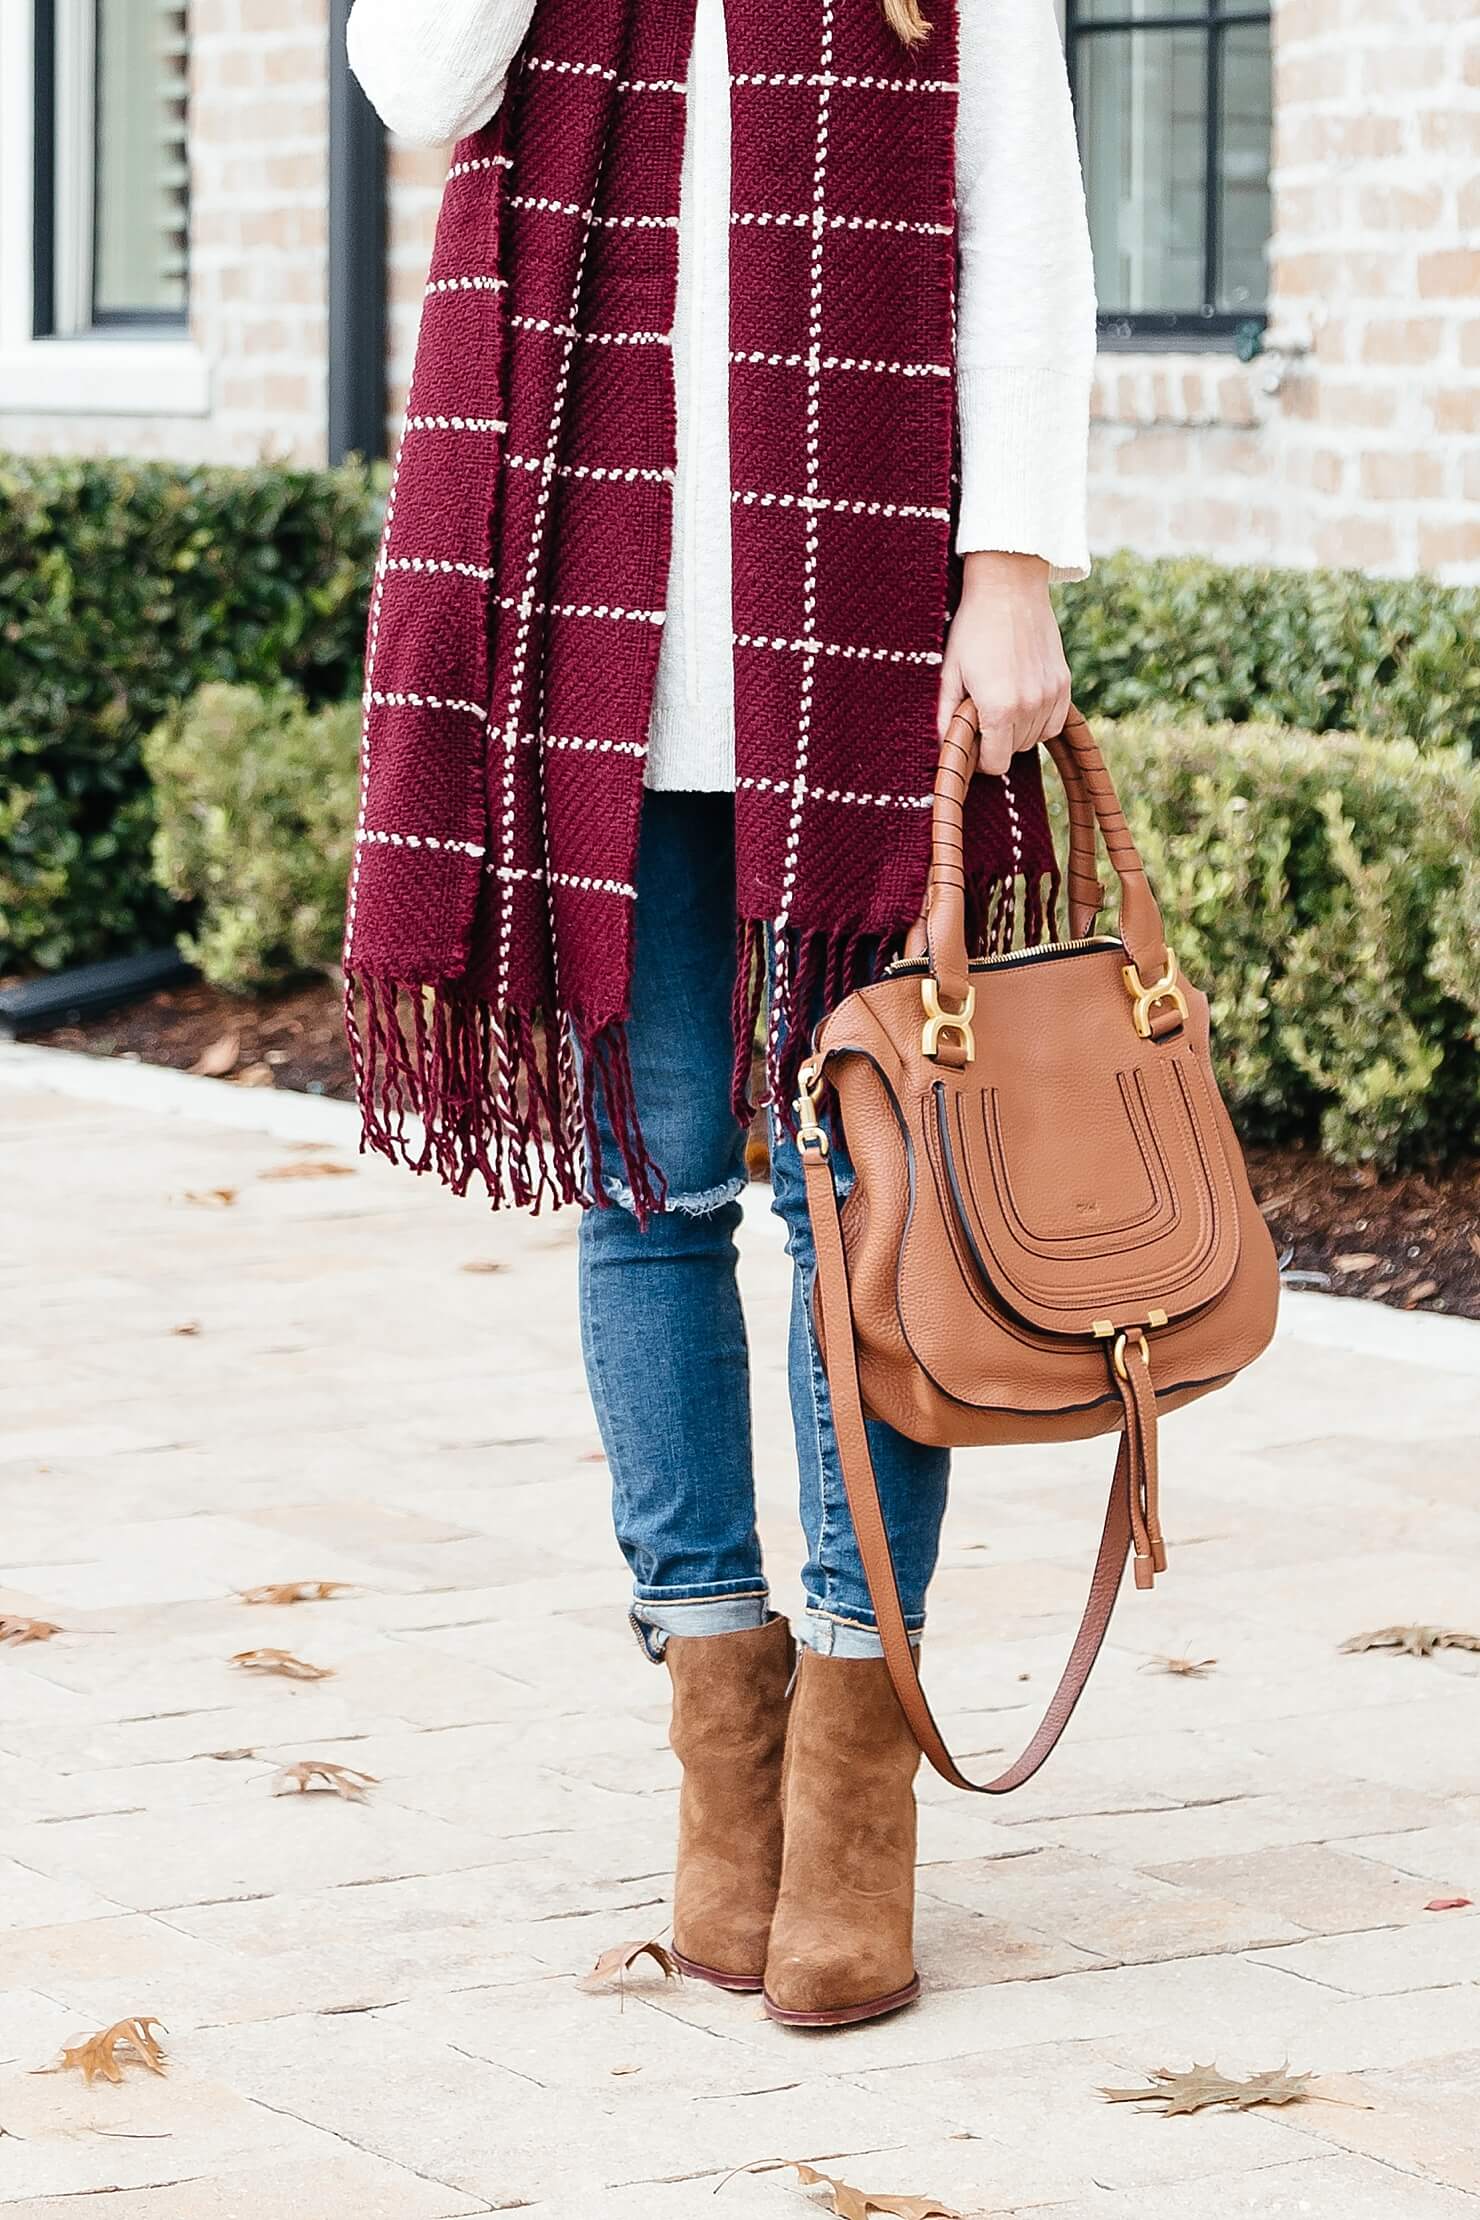 Fall outfit details, distressed AG jeans, sam edelman suede blake booties, cream tunic sweater, burgundy scarf